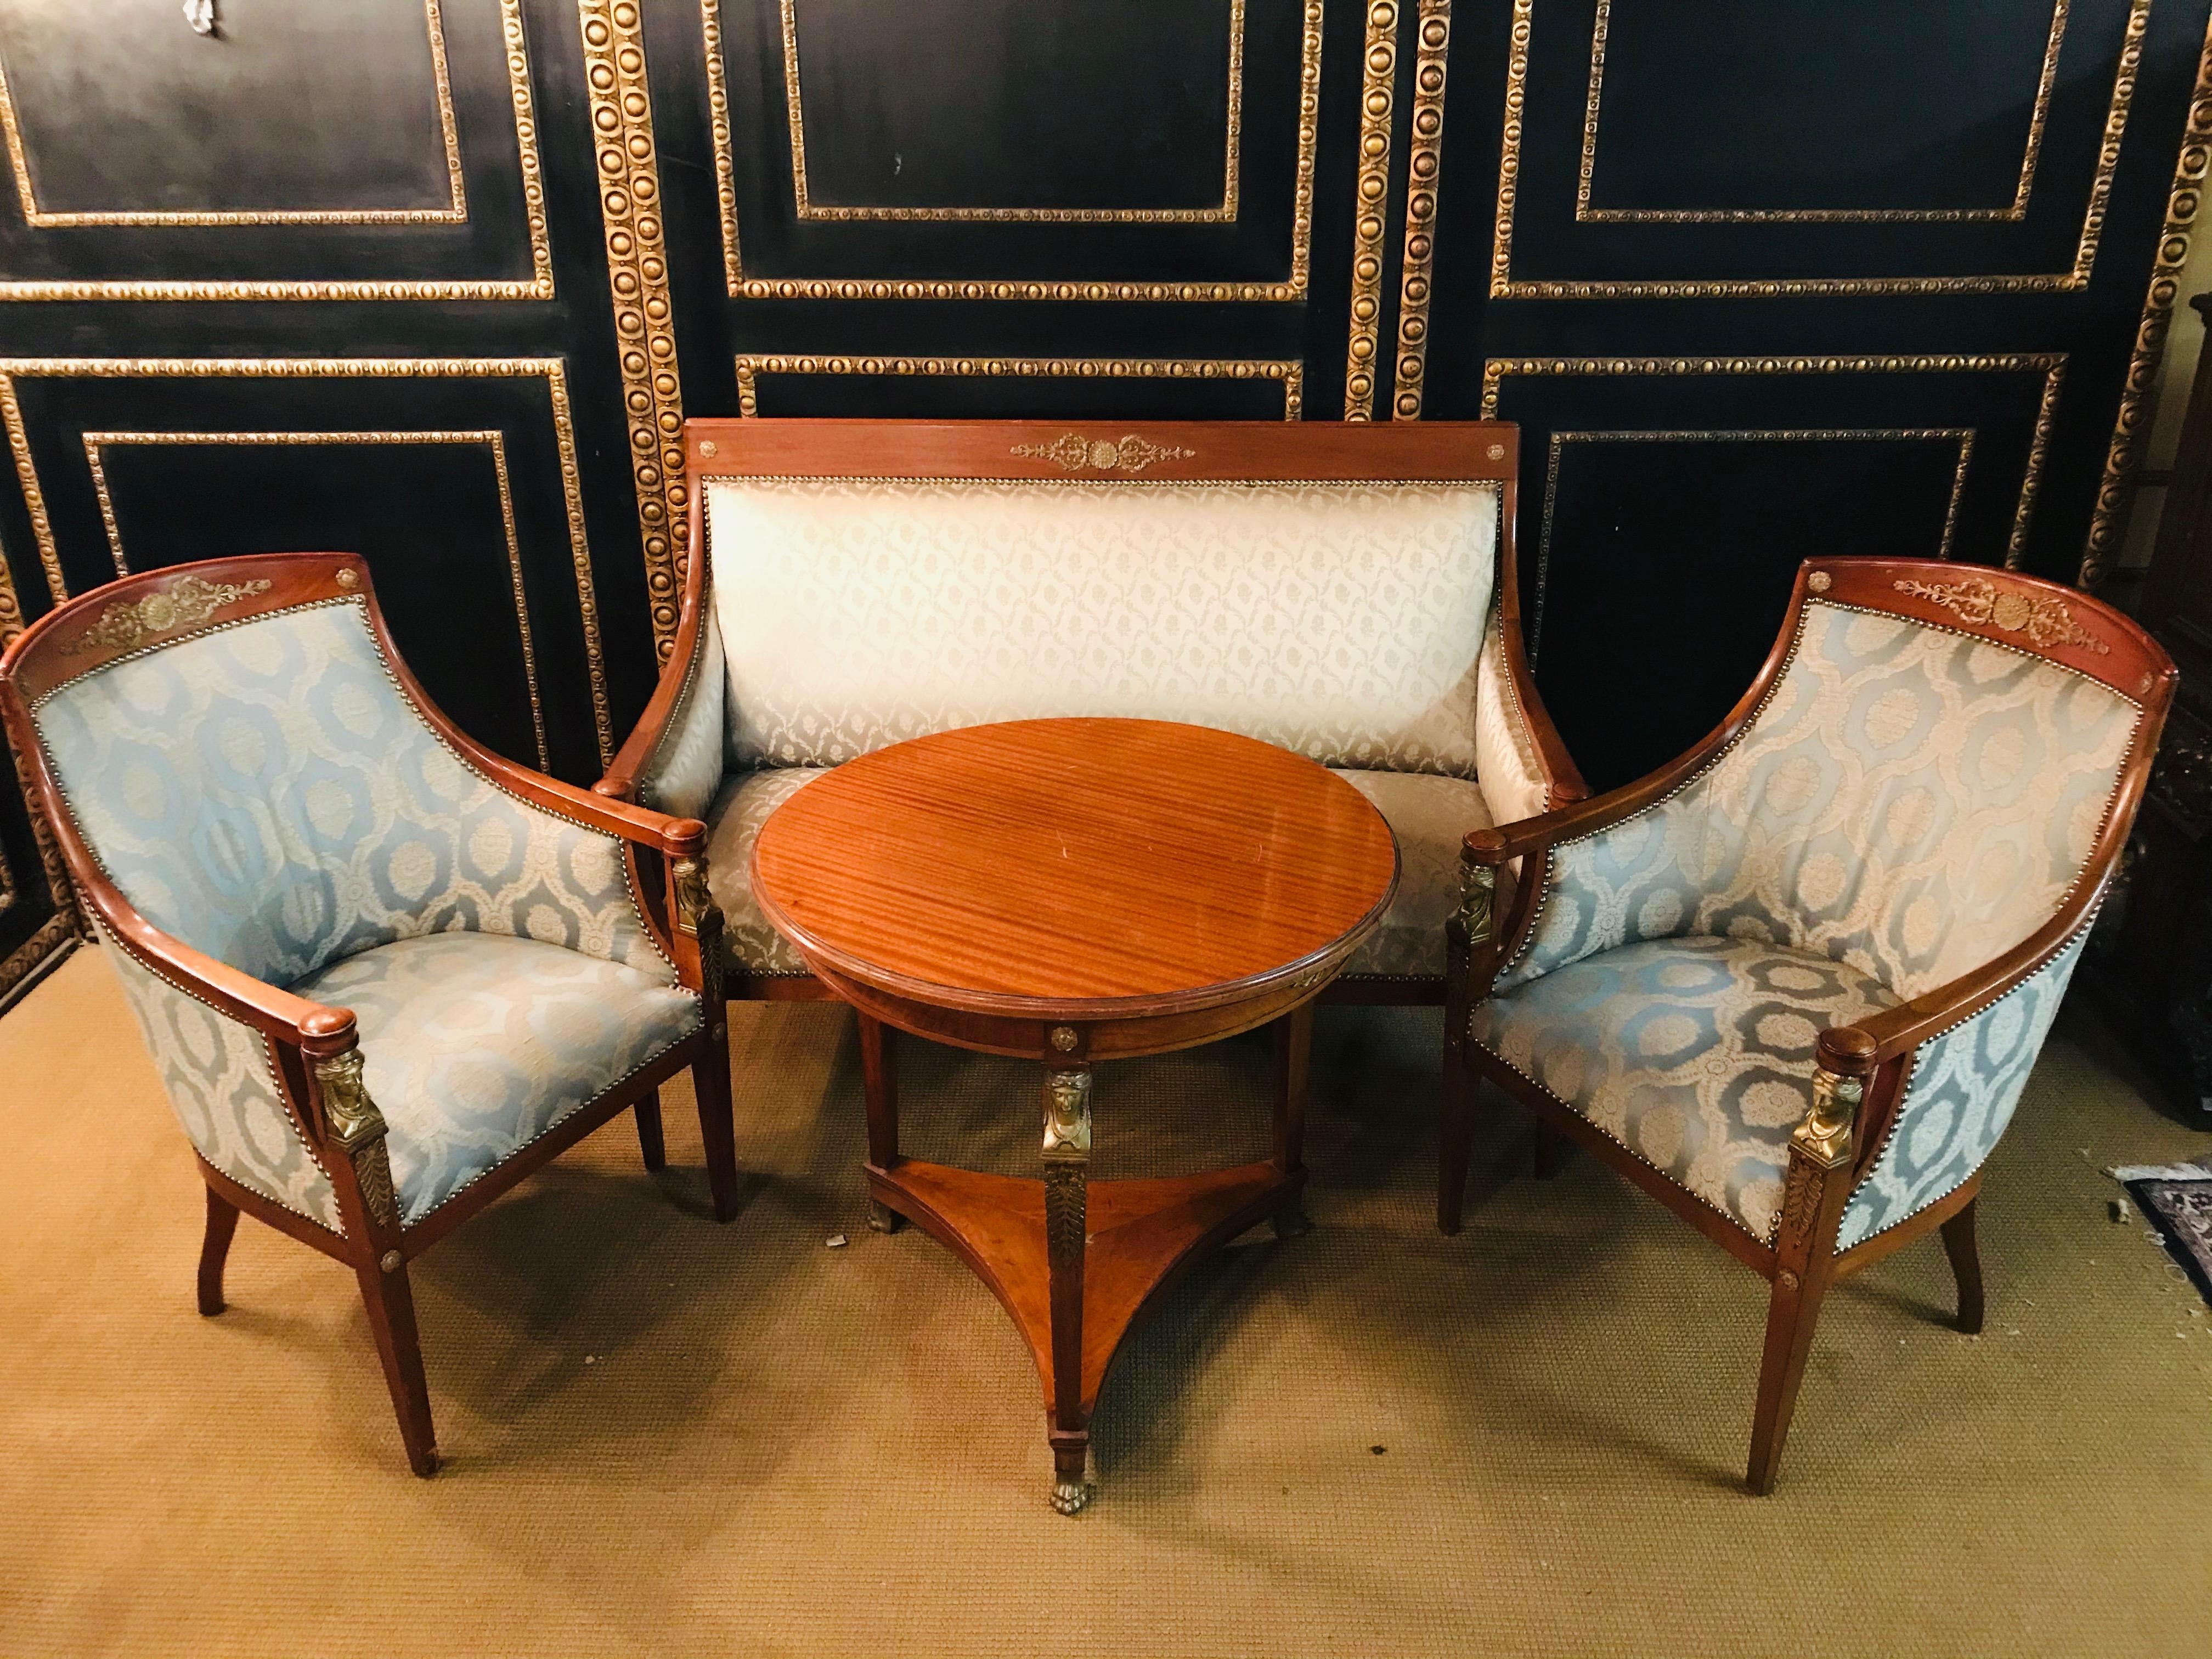 Original Empire sofa circa 1860-1870 from an Empire room.
Massive mahogany cast with Empire caryadites bronze.
The armchairs are made of a different fabric than the sofa and should be replaced
Top